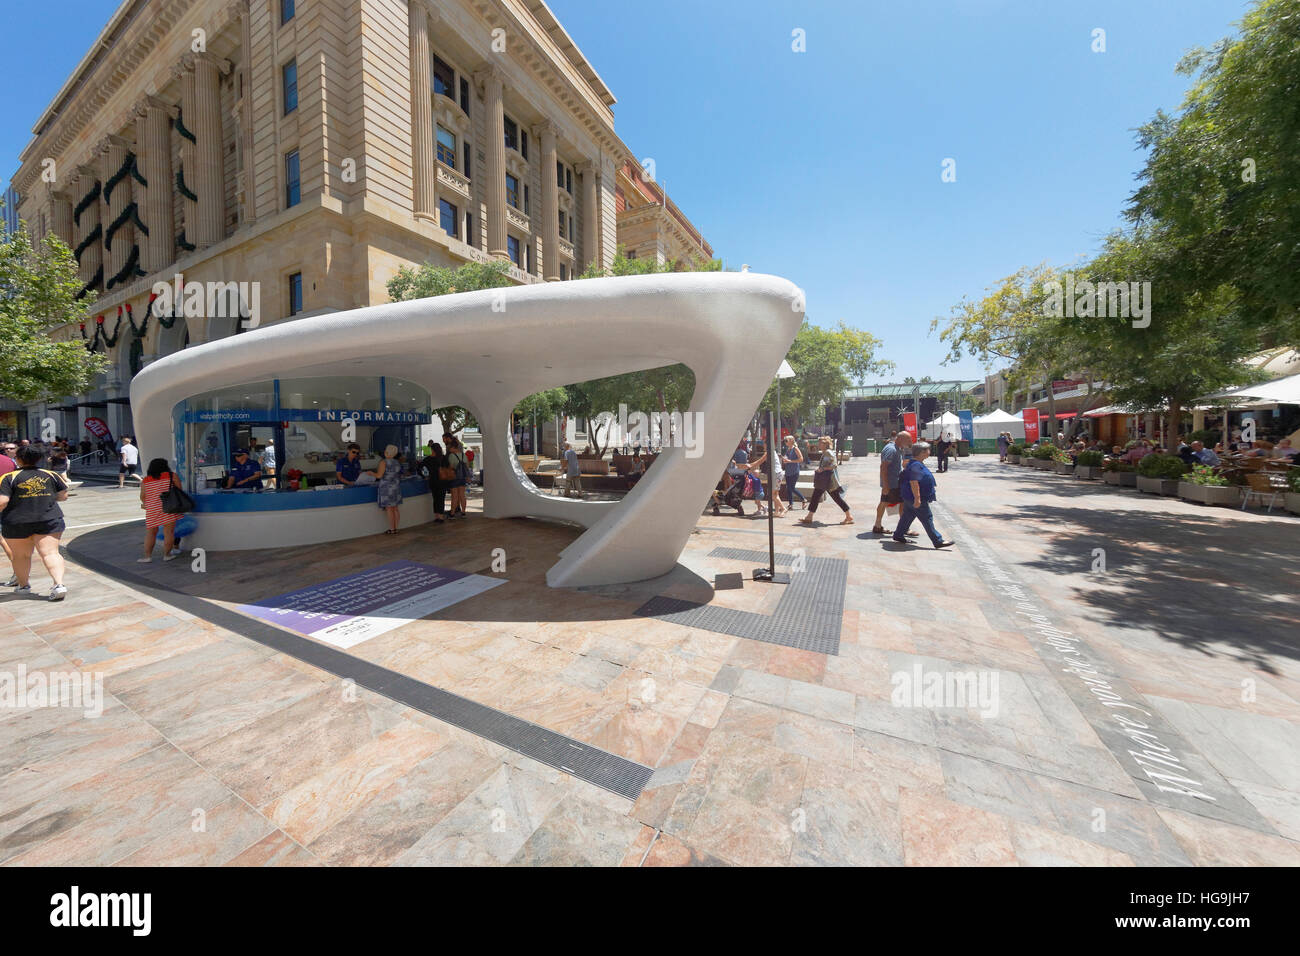 City information centre, Forrest Chase, Perth, Western Australia. Stock Photo